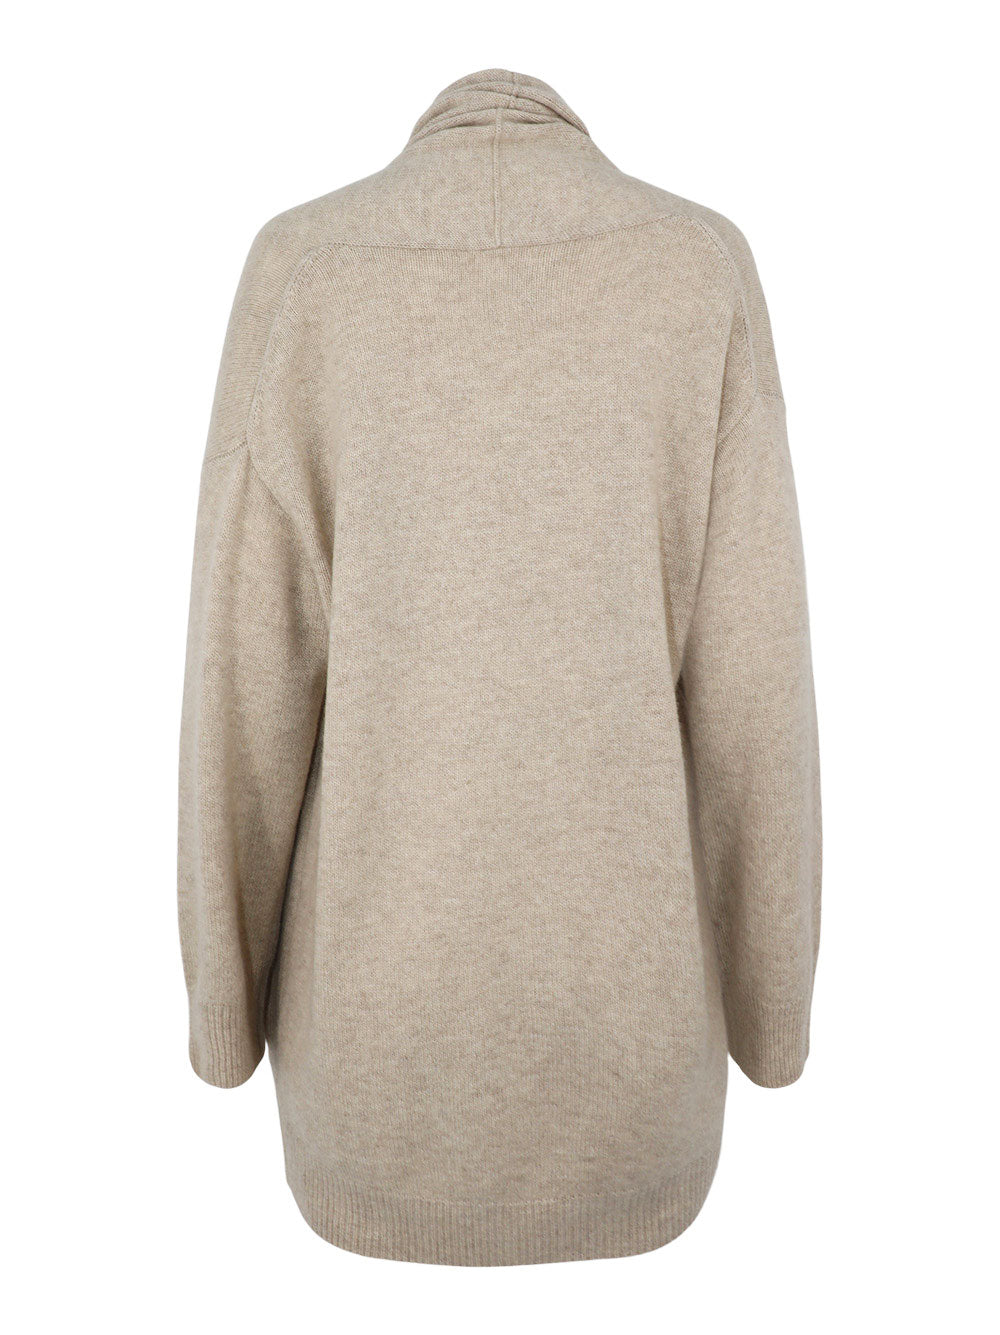 One Grey Day Bixby Cashmere Cardigan (More Colors)